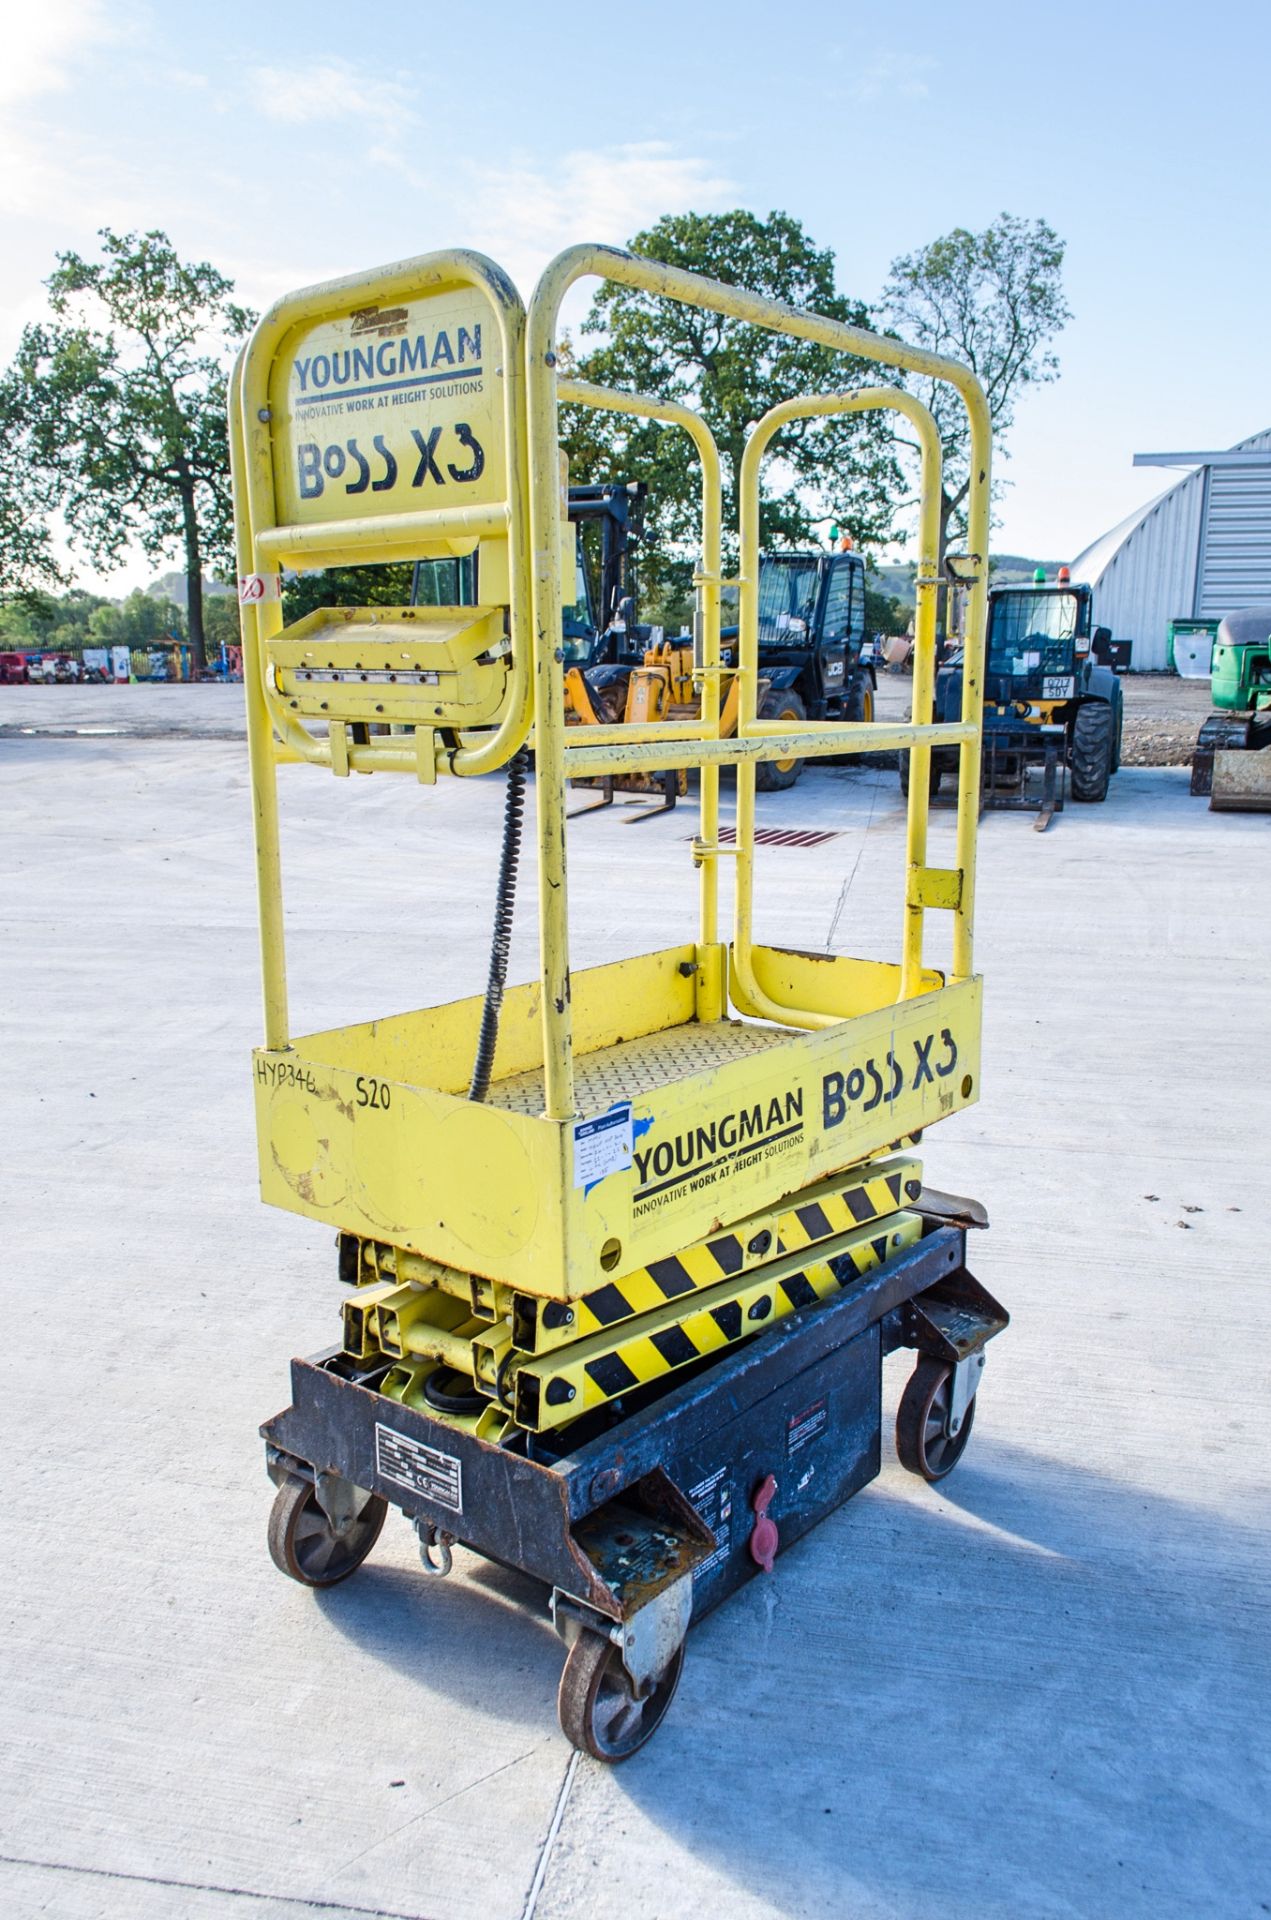 Youngman Boss X3 battery electric push around access platform Year: 2013 S/N: 12112 HYP346